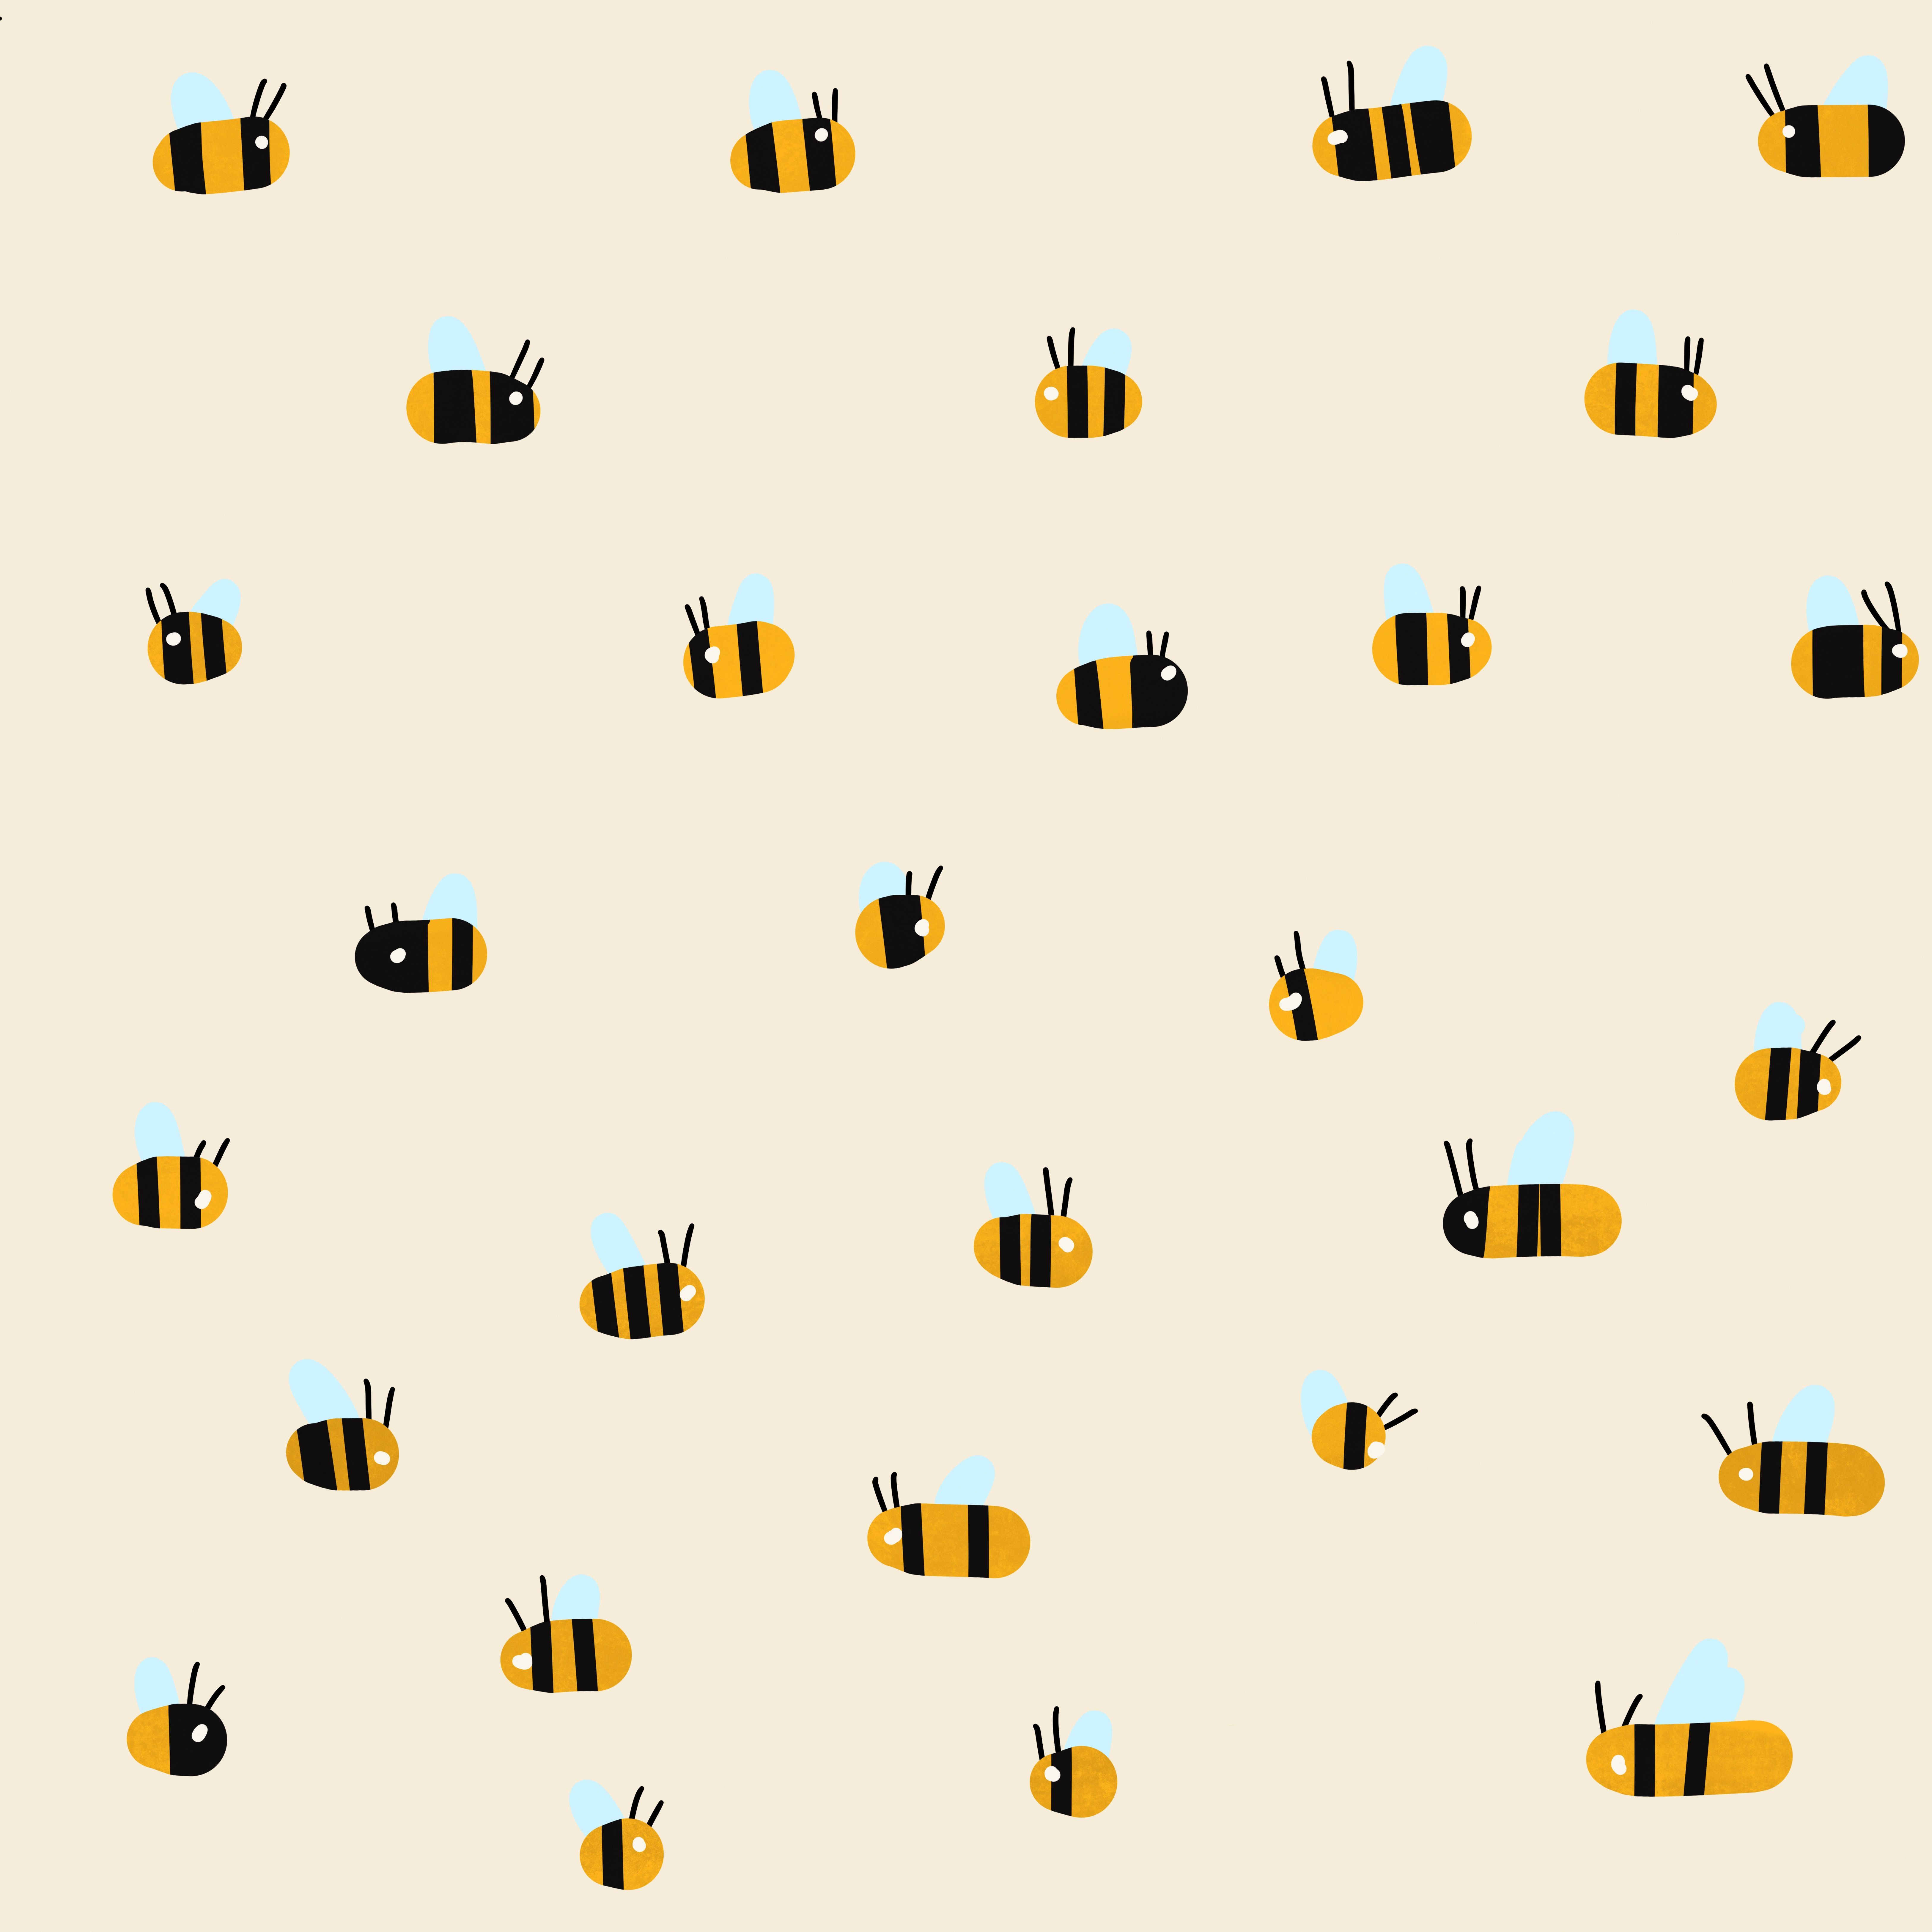 Bees flying around. iPhone background wallpaper, Cute wallpaper, Cute patterns wallpaper